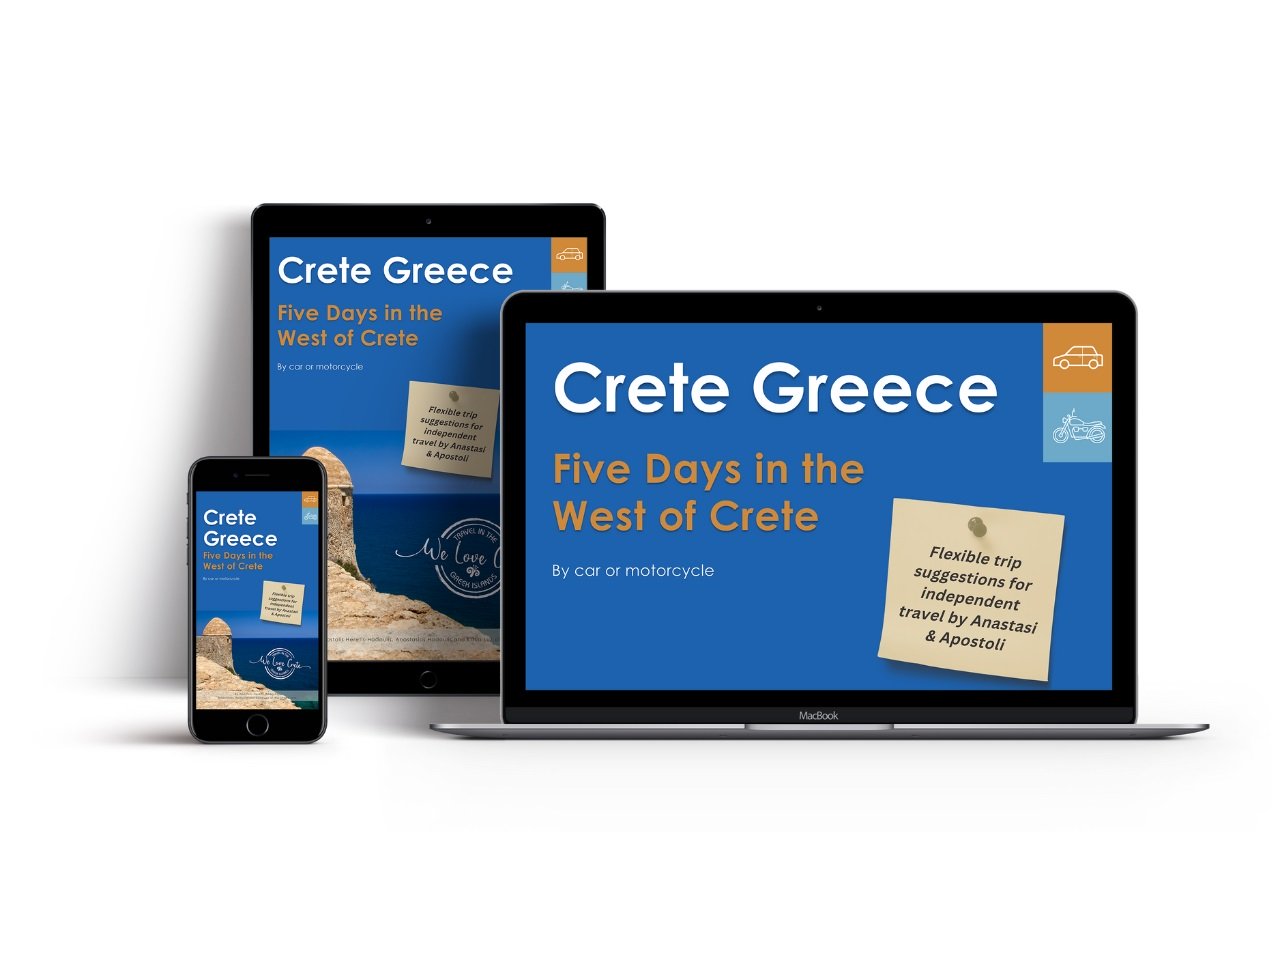 Five Days in the West of Crete by Car or Motorcycle